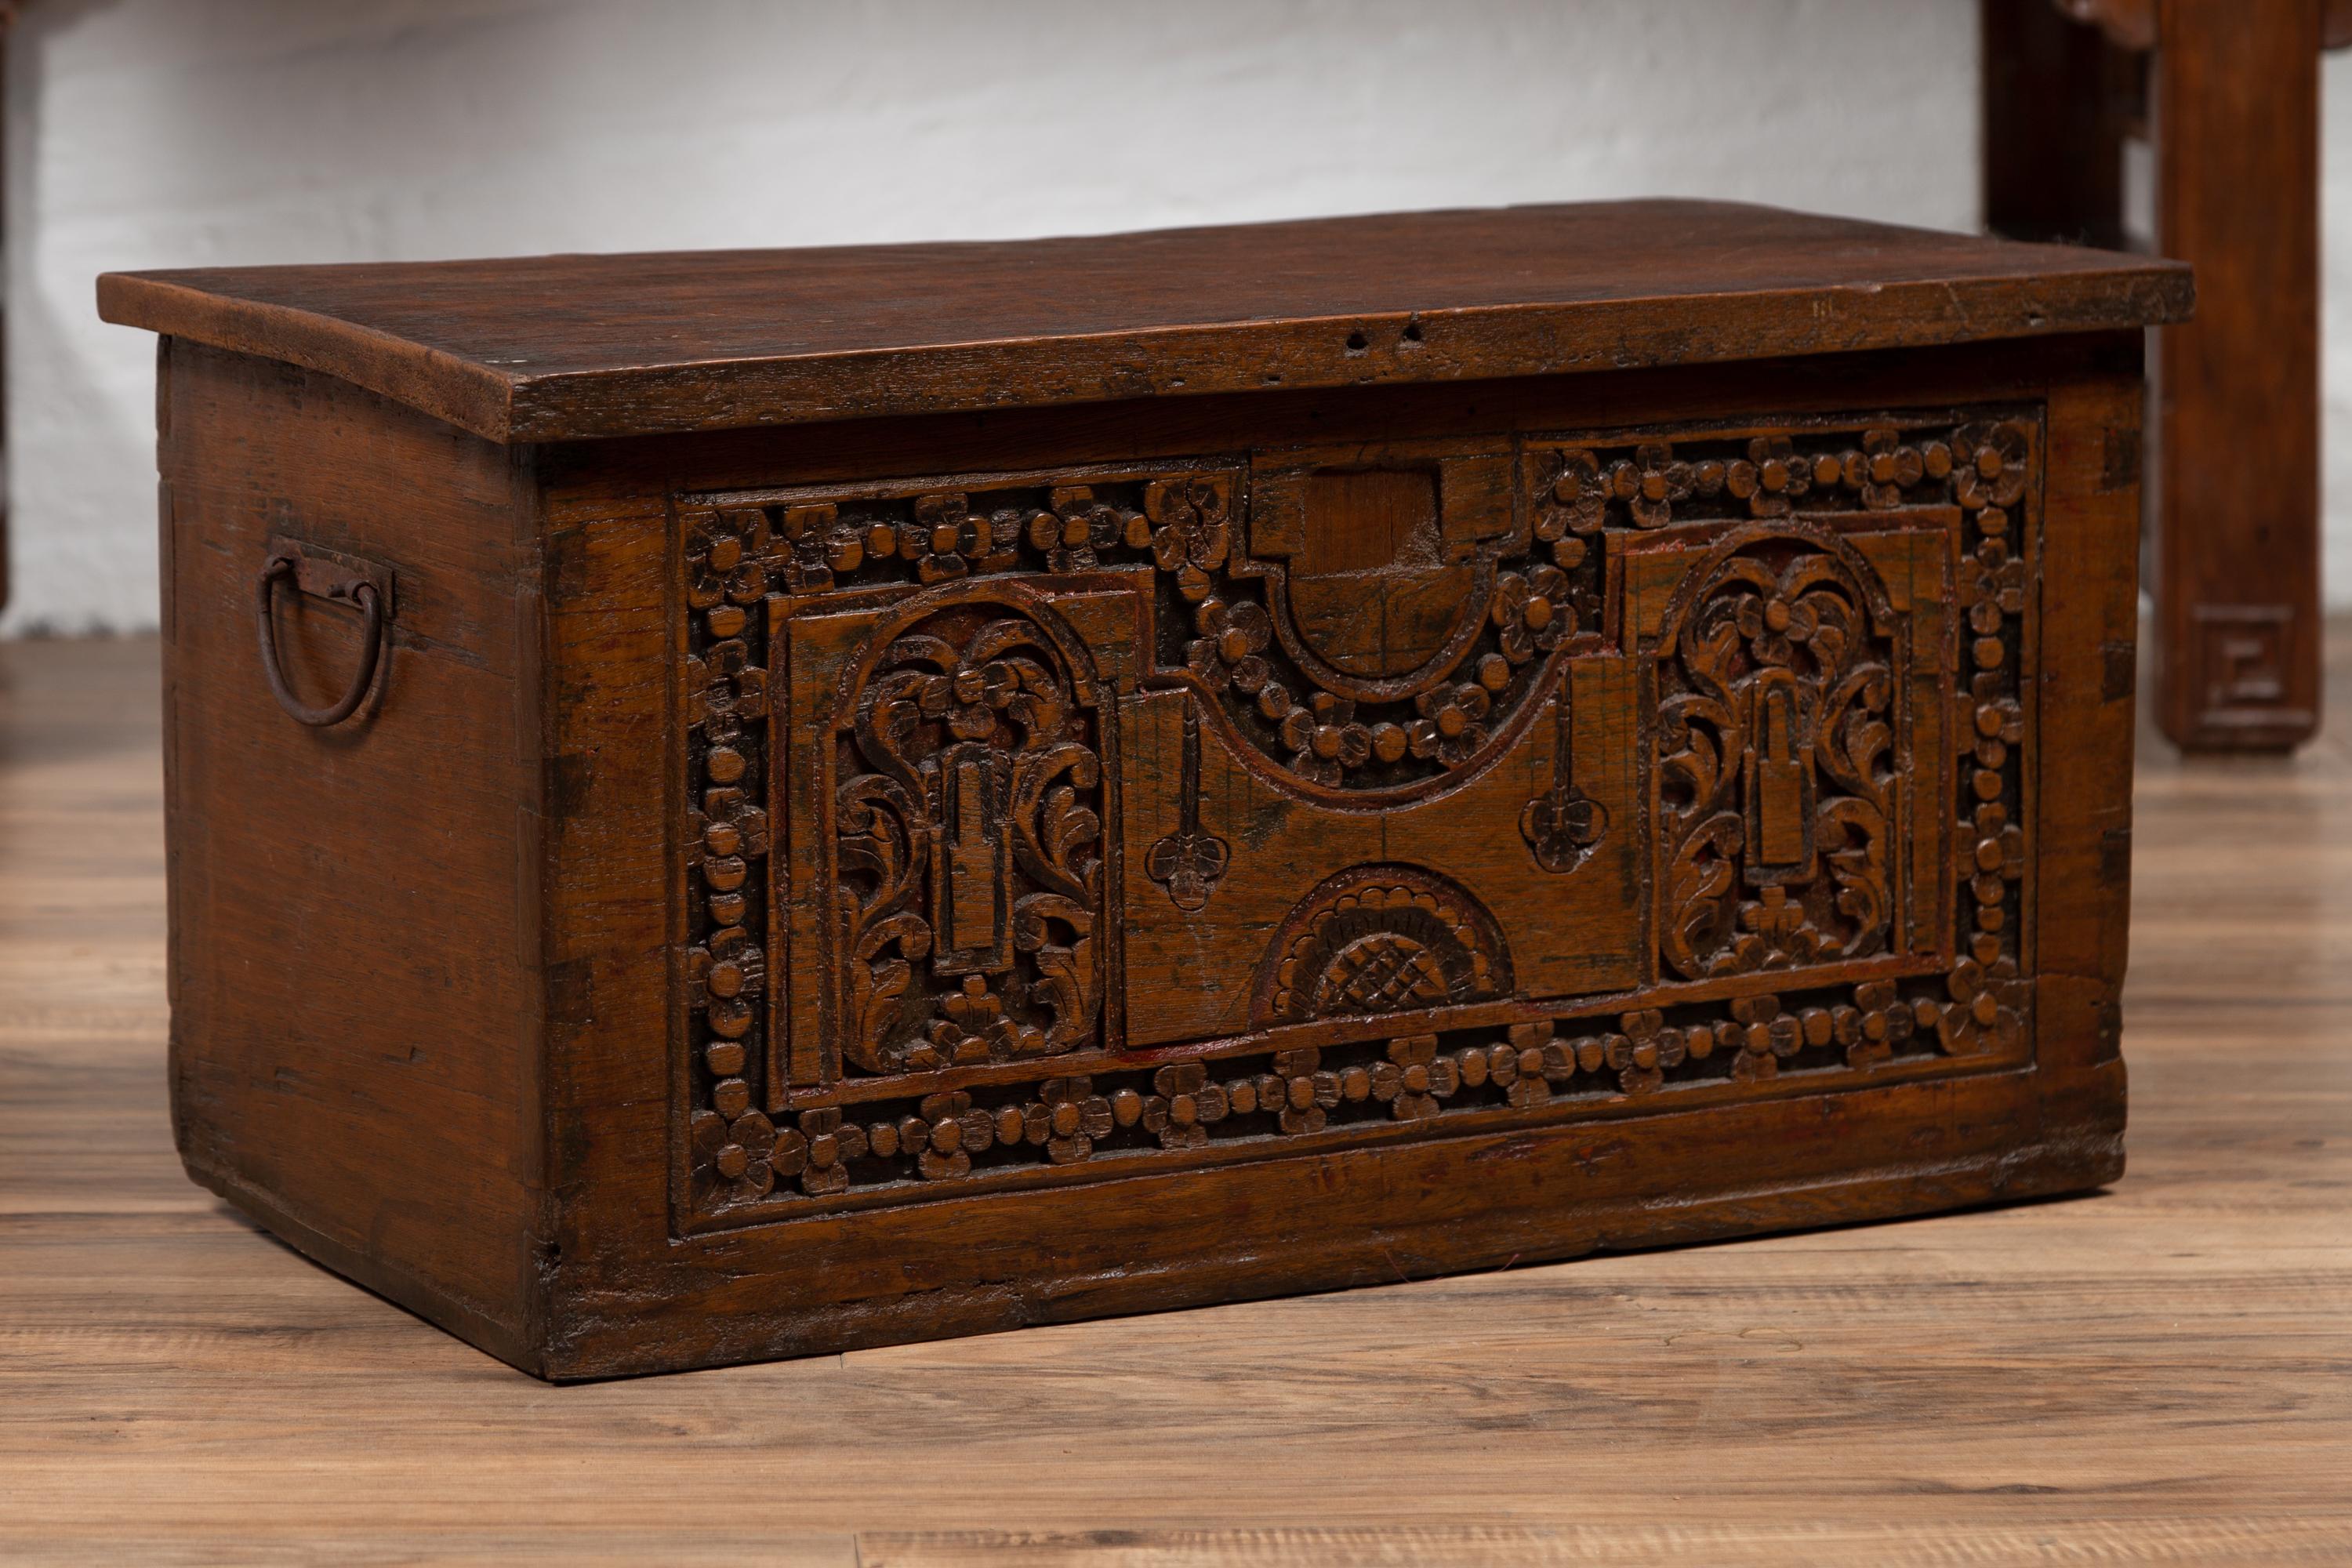 Antique Indonesian Decorative Wooden Box with Carved Flowers and Architecture For Sale 3